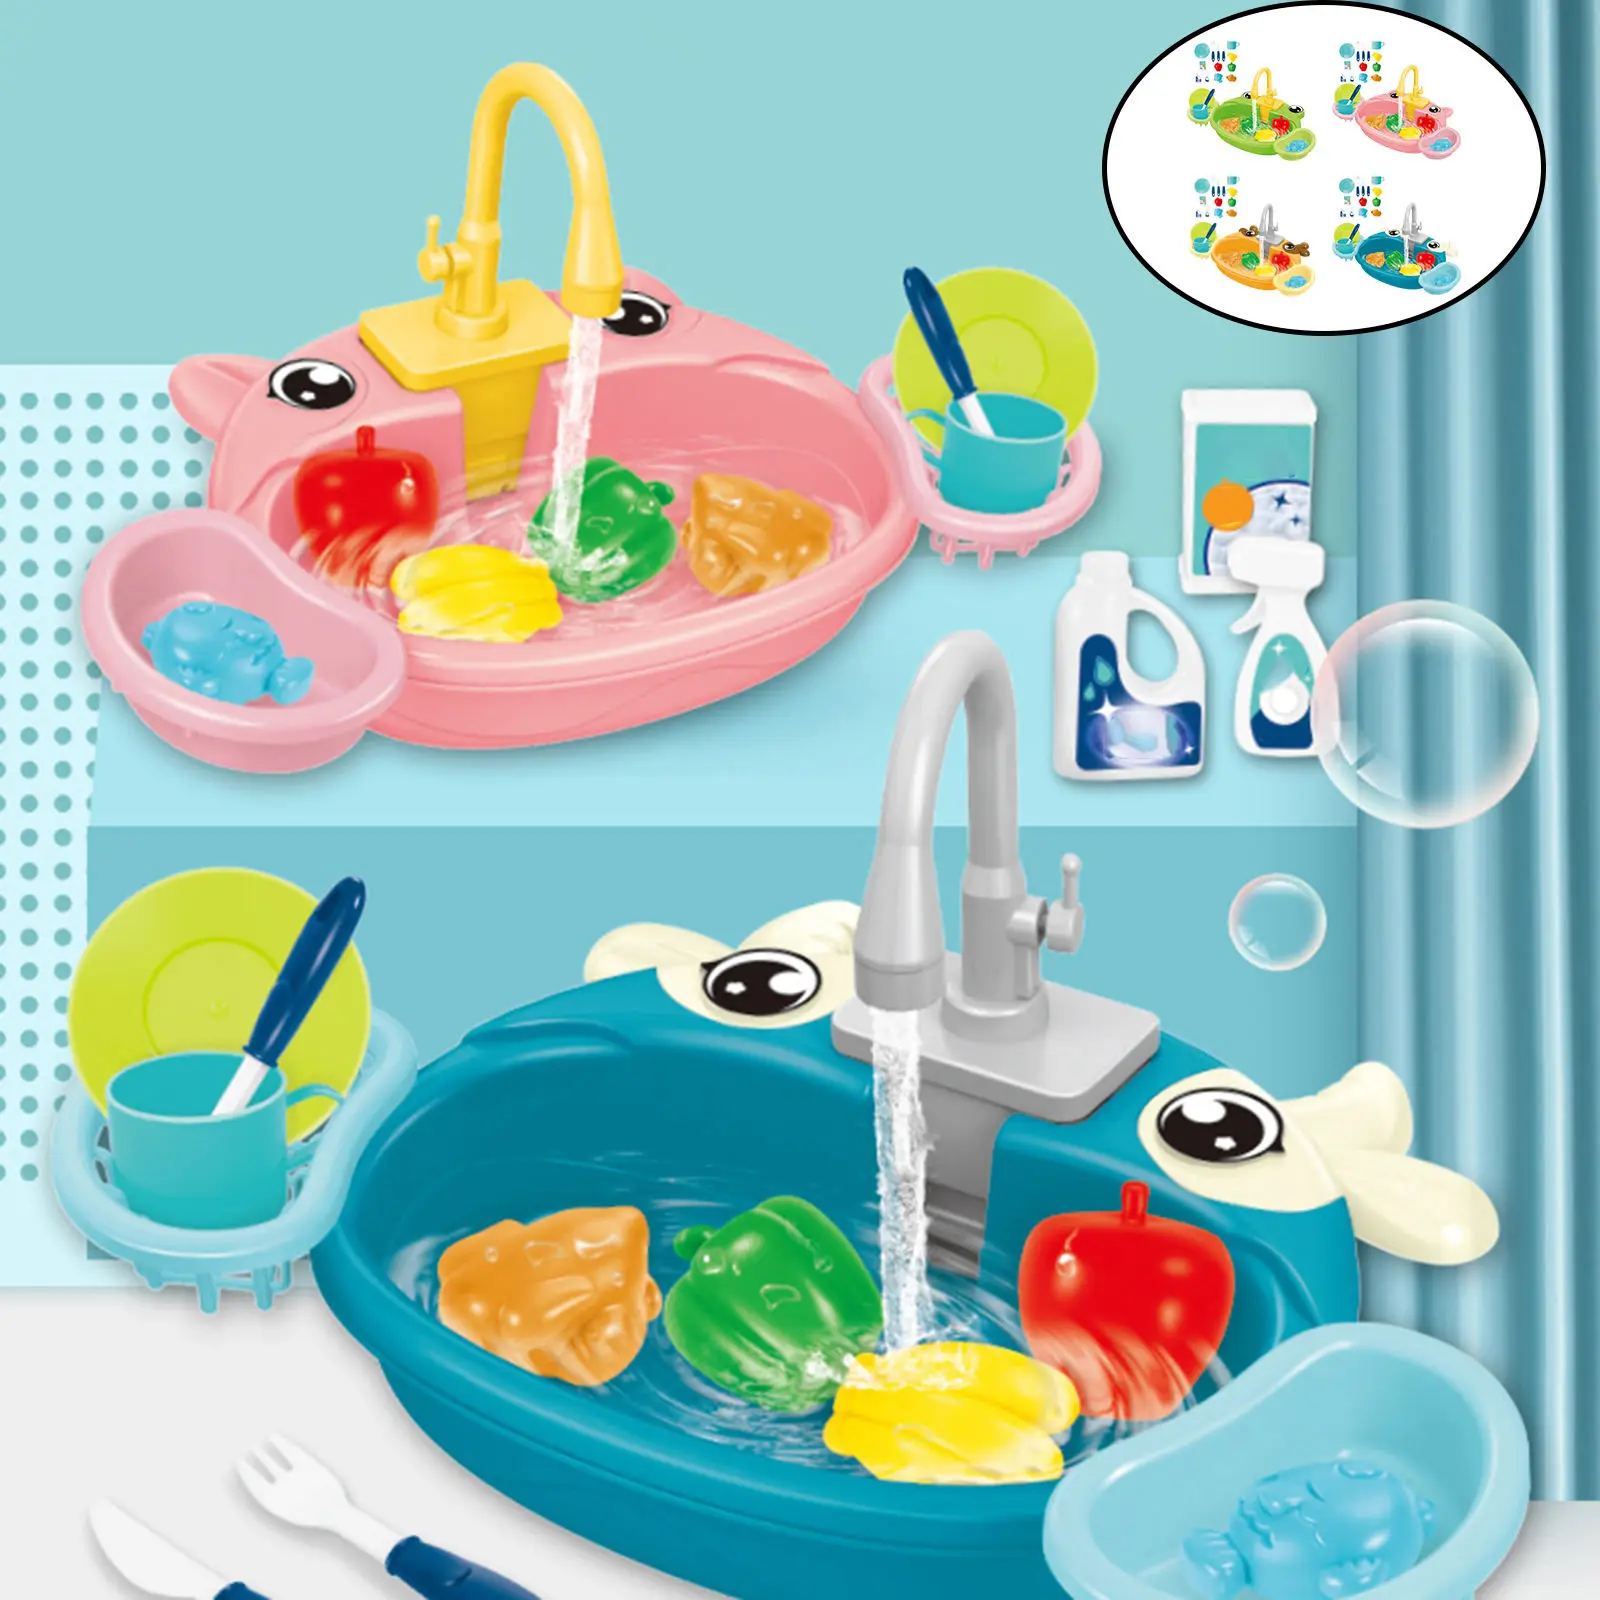 Kitchen Sink Toys Play Dishes Pretend Cleaning with Running Water Electric Play Set for Play House Gift Kids